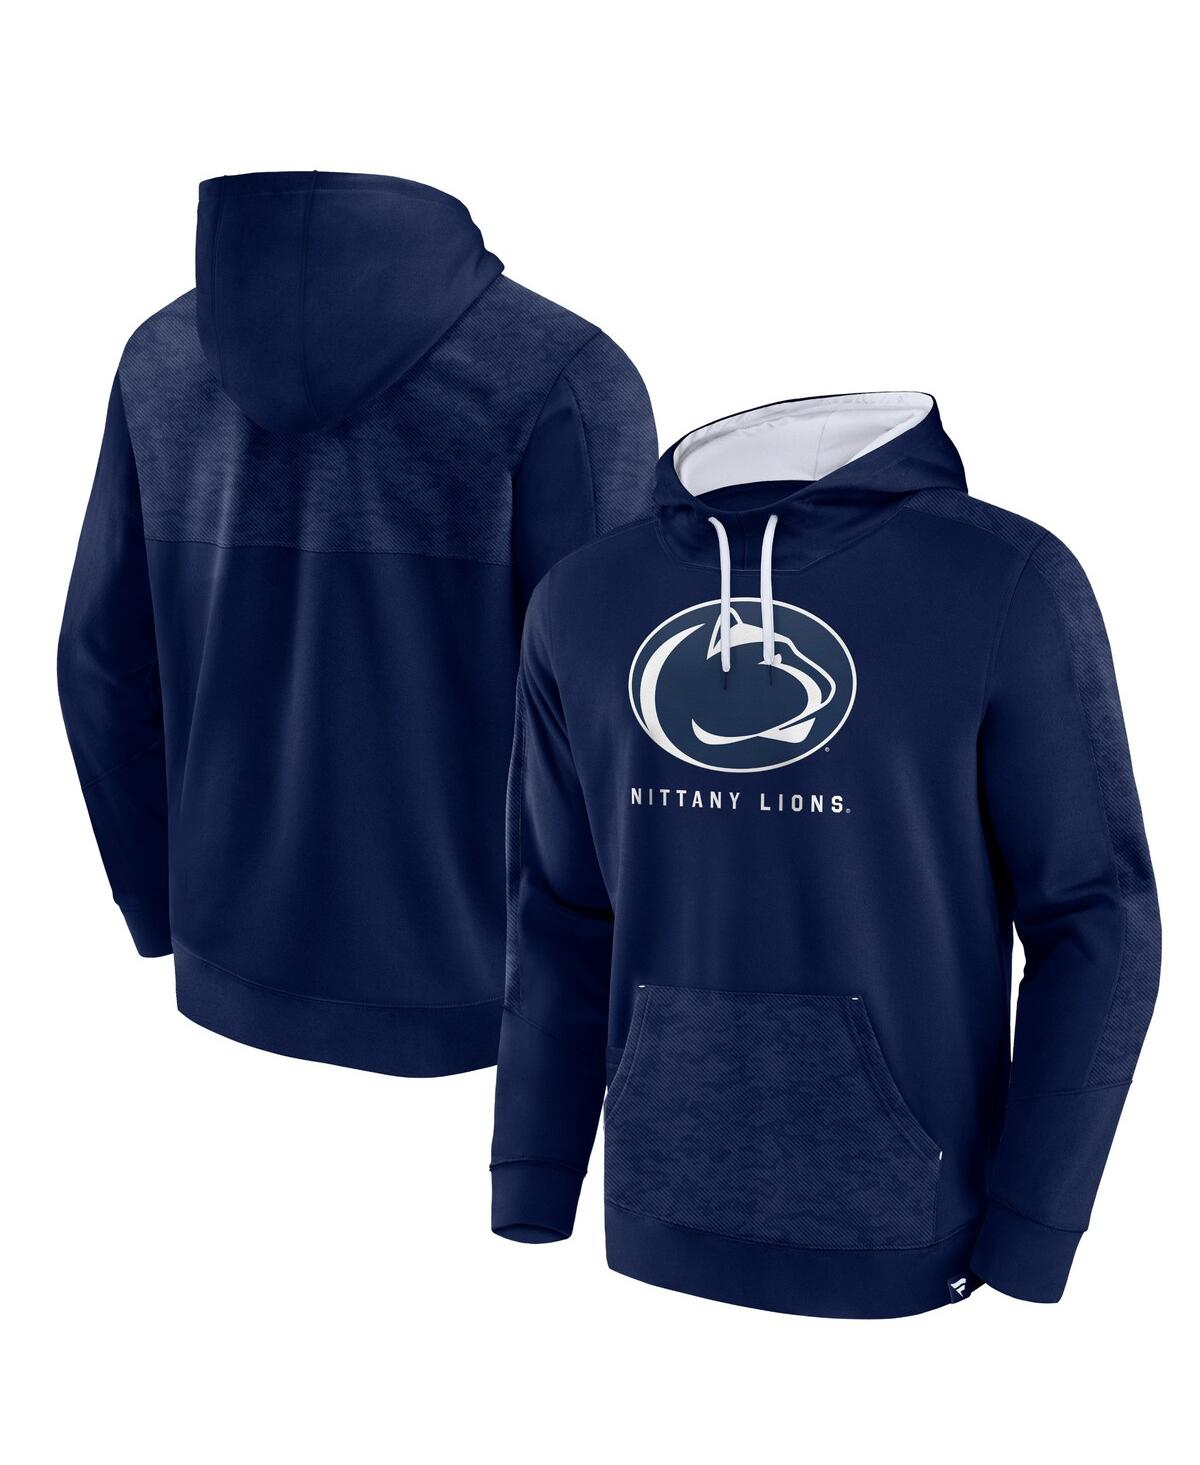 Fanatics Men's  Navy Penn State Nittany Lions Defender Pullover Hoodie